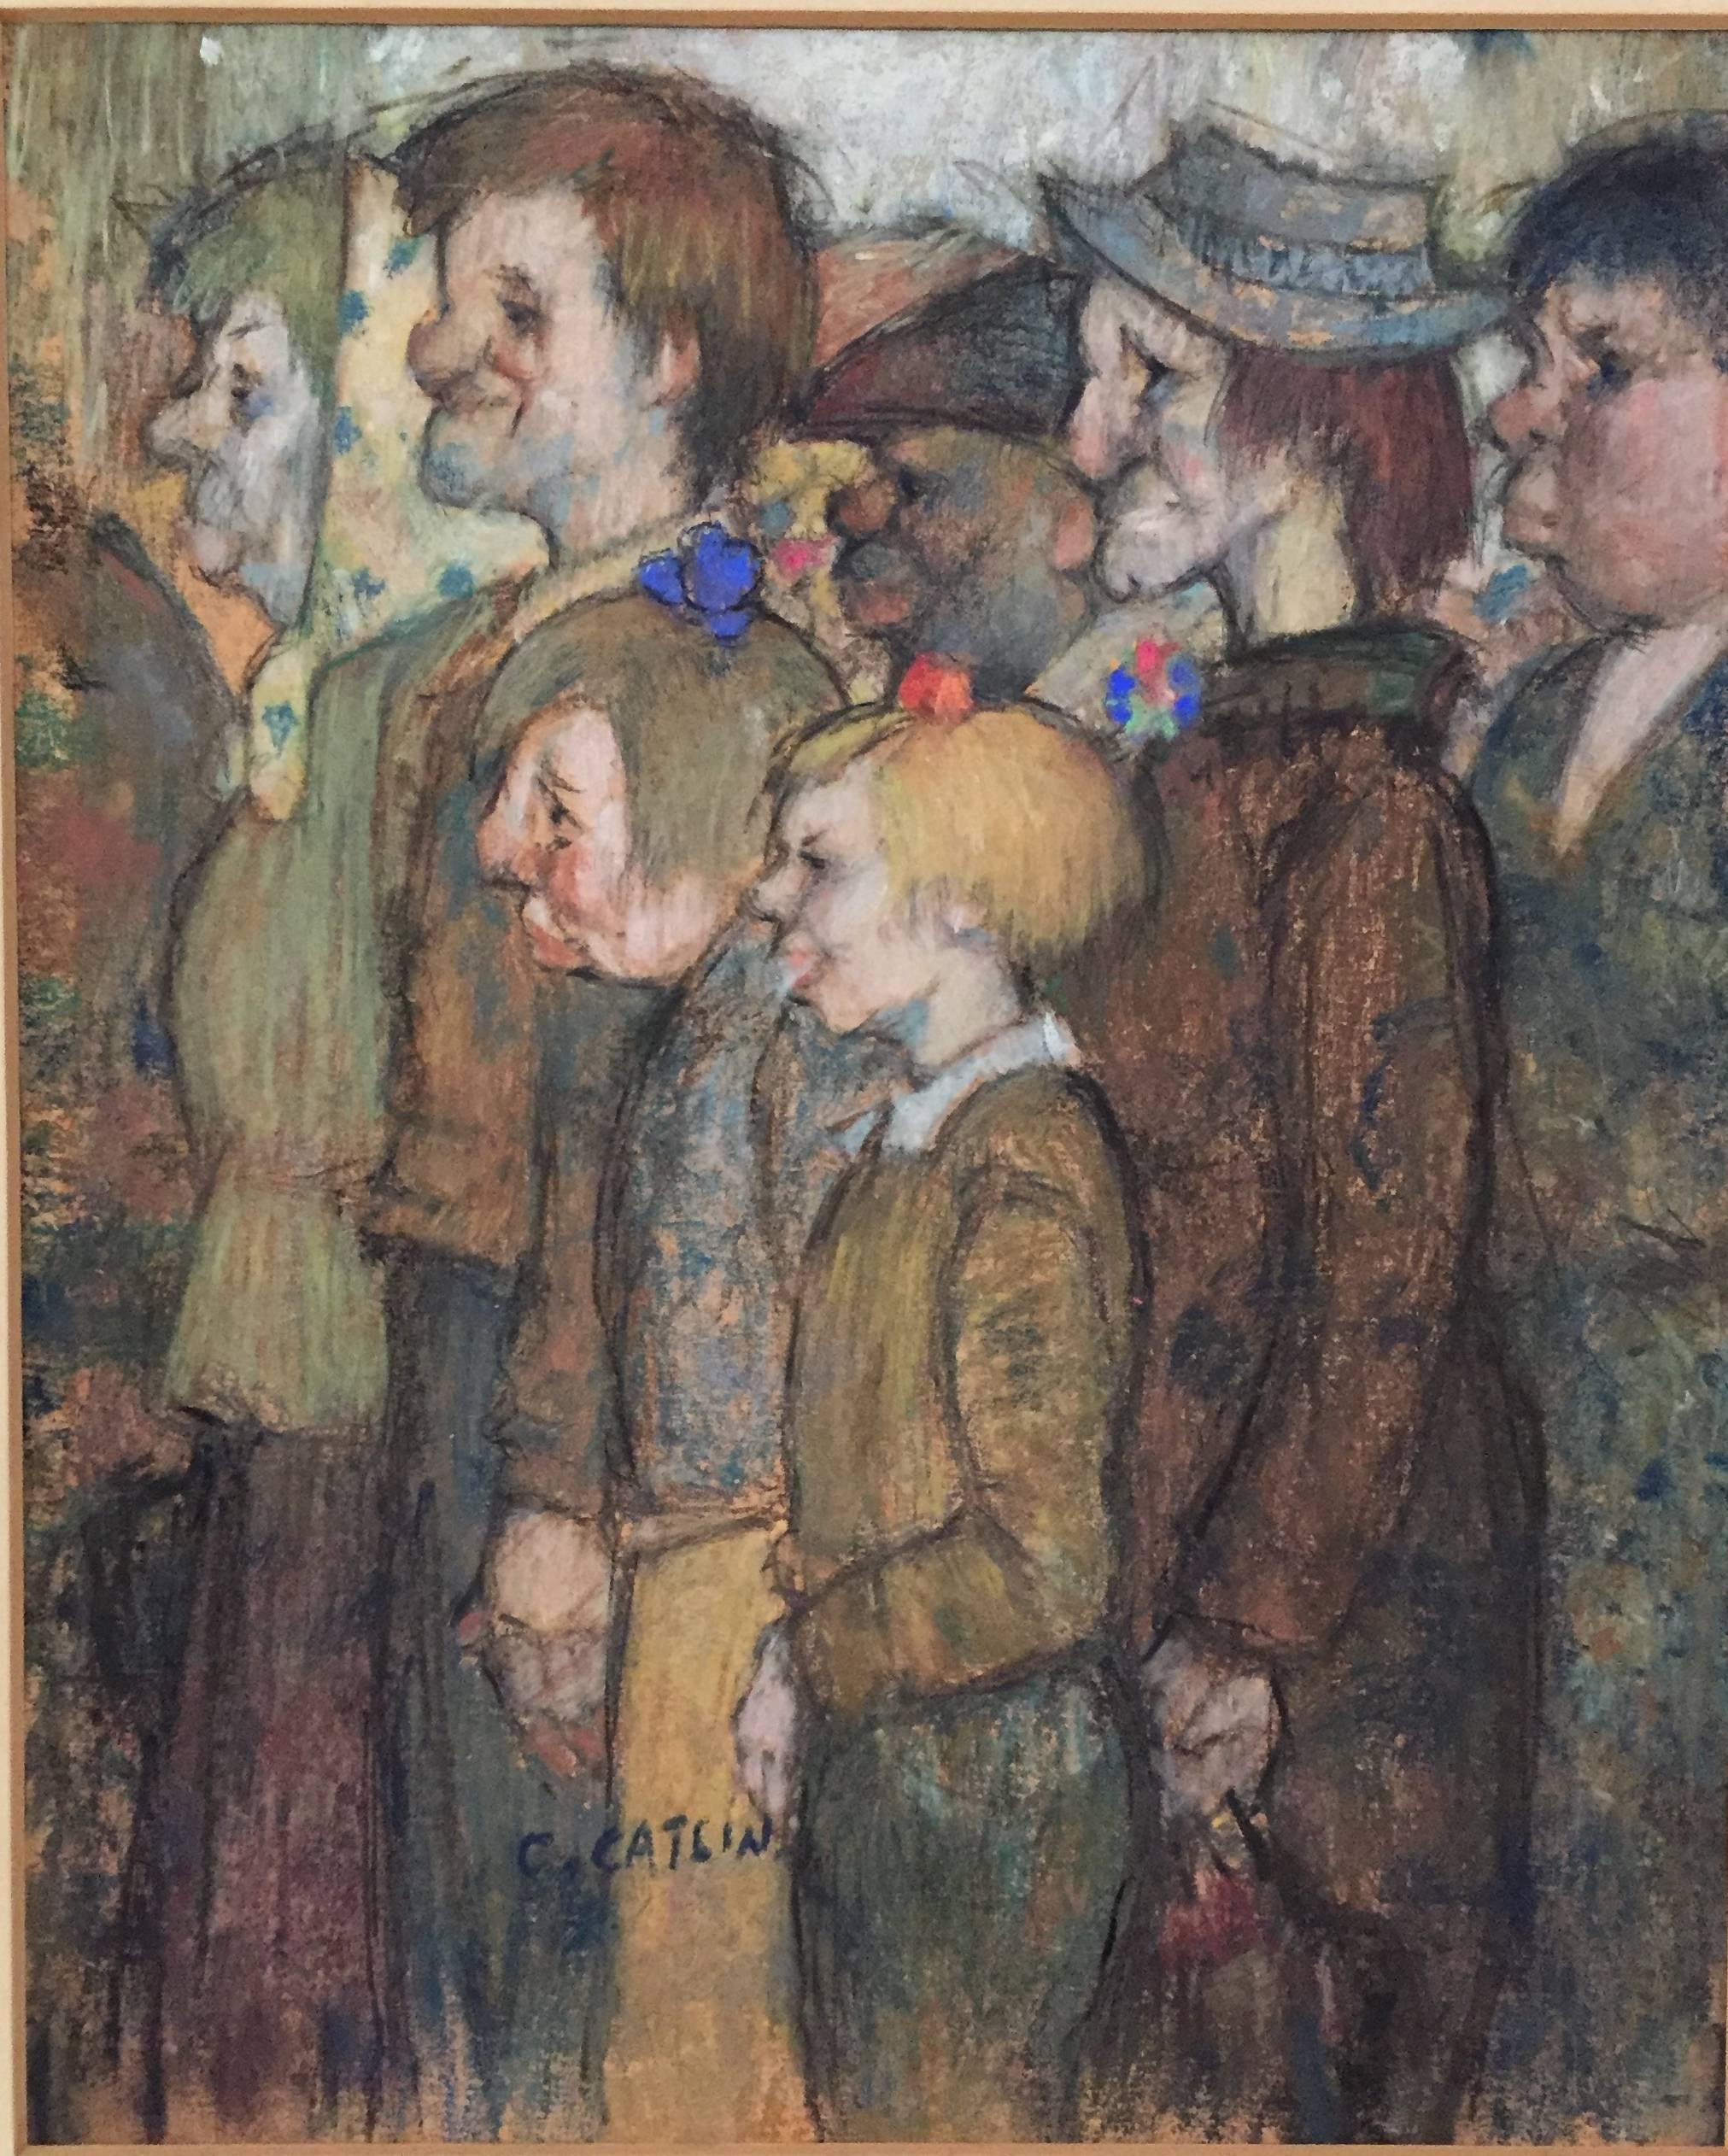 Signed lower left, C Catlin. Oil crayon (pastel) on paper, circa 1930. The artist has depicted a working class crowd in pronounced profile.

Framing treatment consists of simple gilded wood molding, matted and glazed. Overall dimensions 17.25